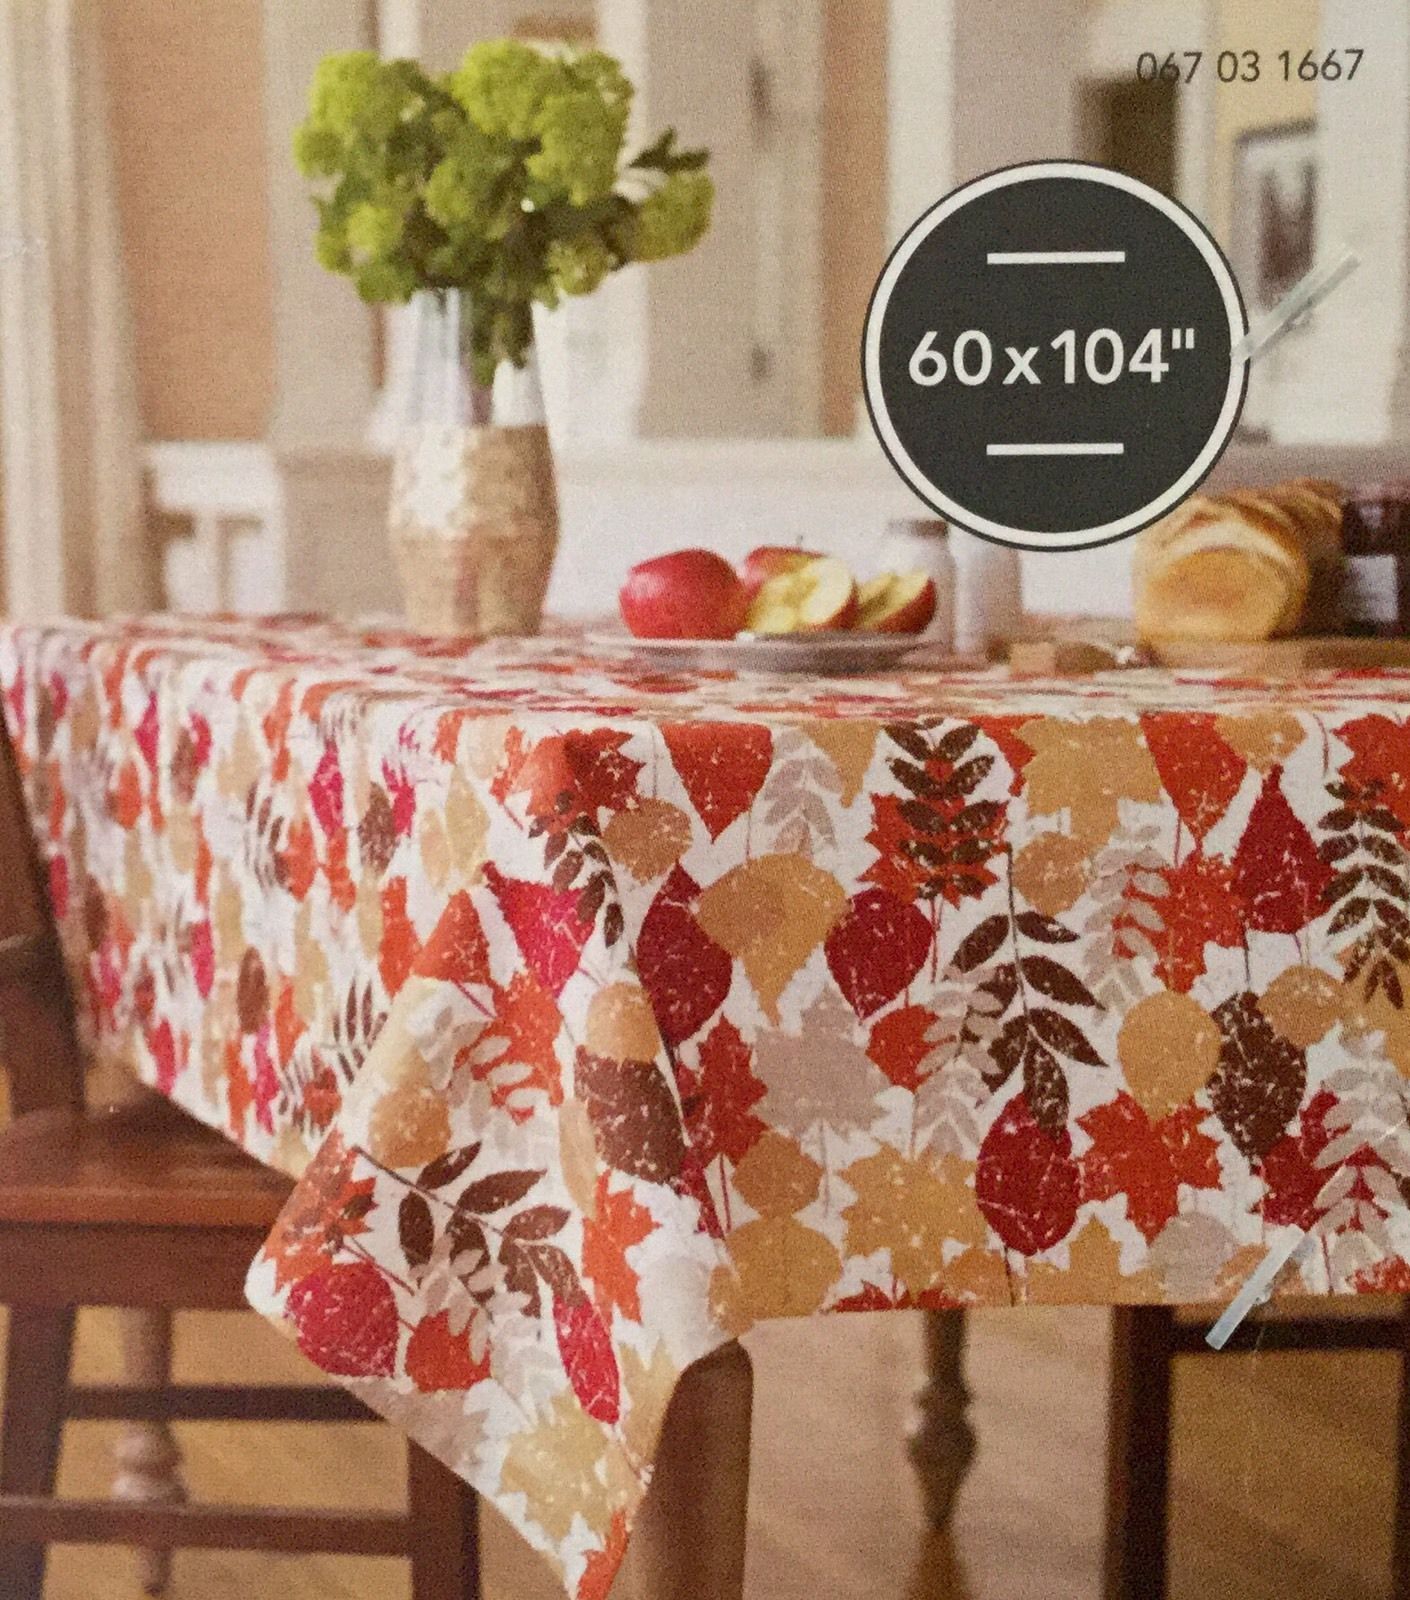 Threshold OBLONG 60" X 104" Tablecloth Leaf Print With Gold Metallic Accent NEW - $17.94